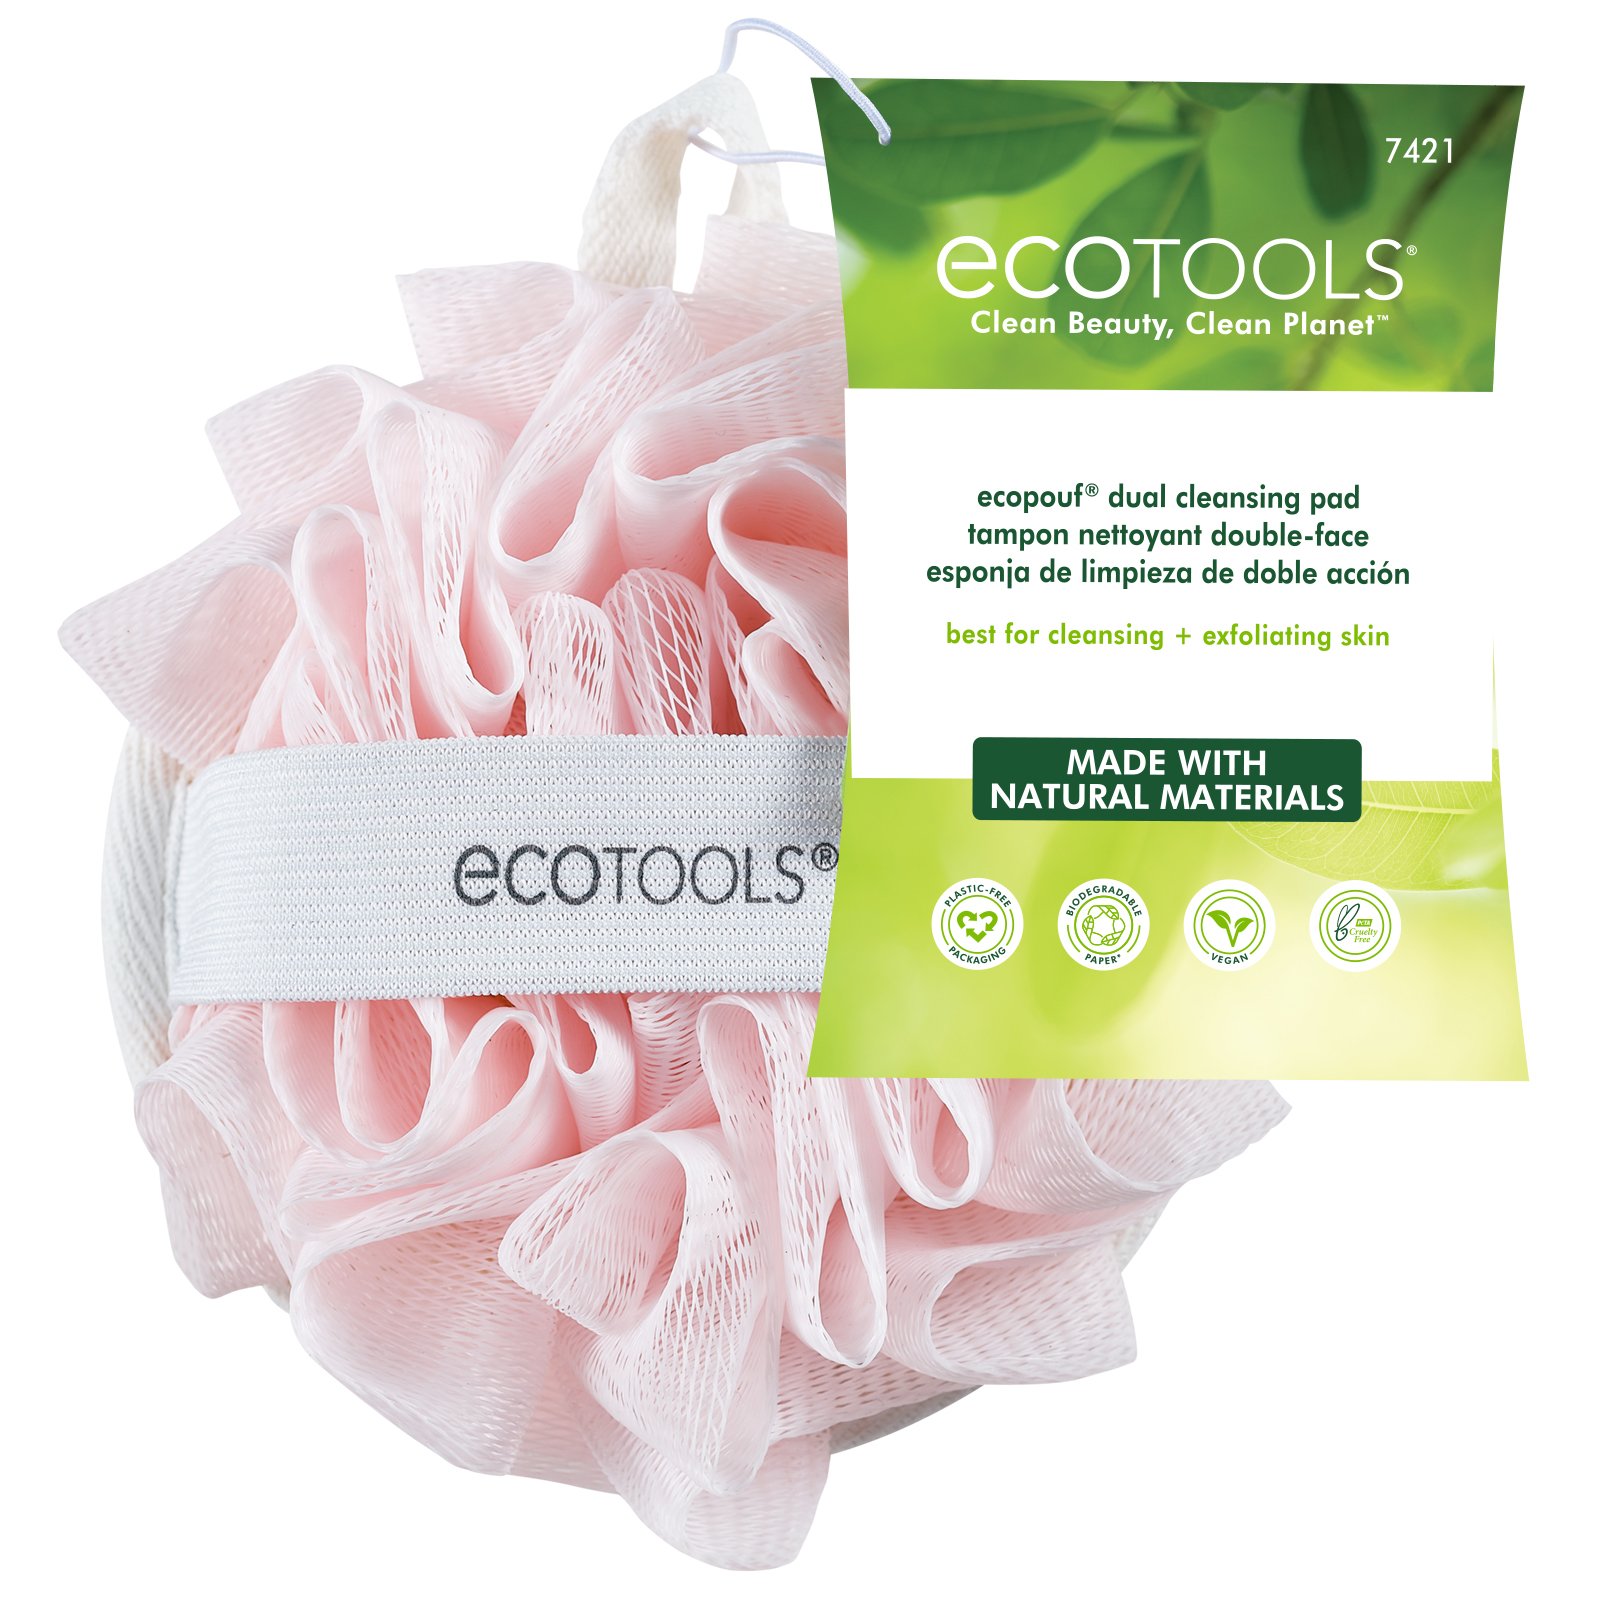 Eco Tools Ecopoud Dual Cleansing Pad 1 st